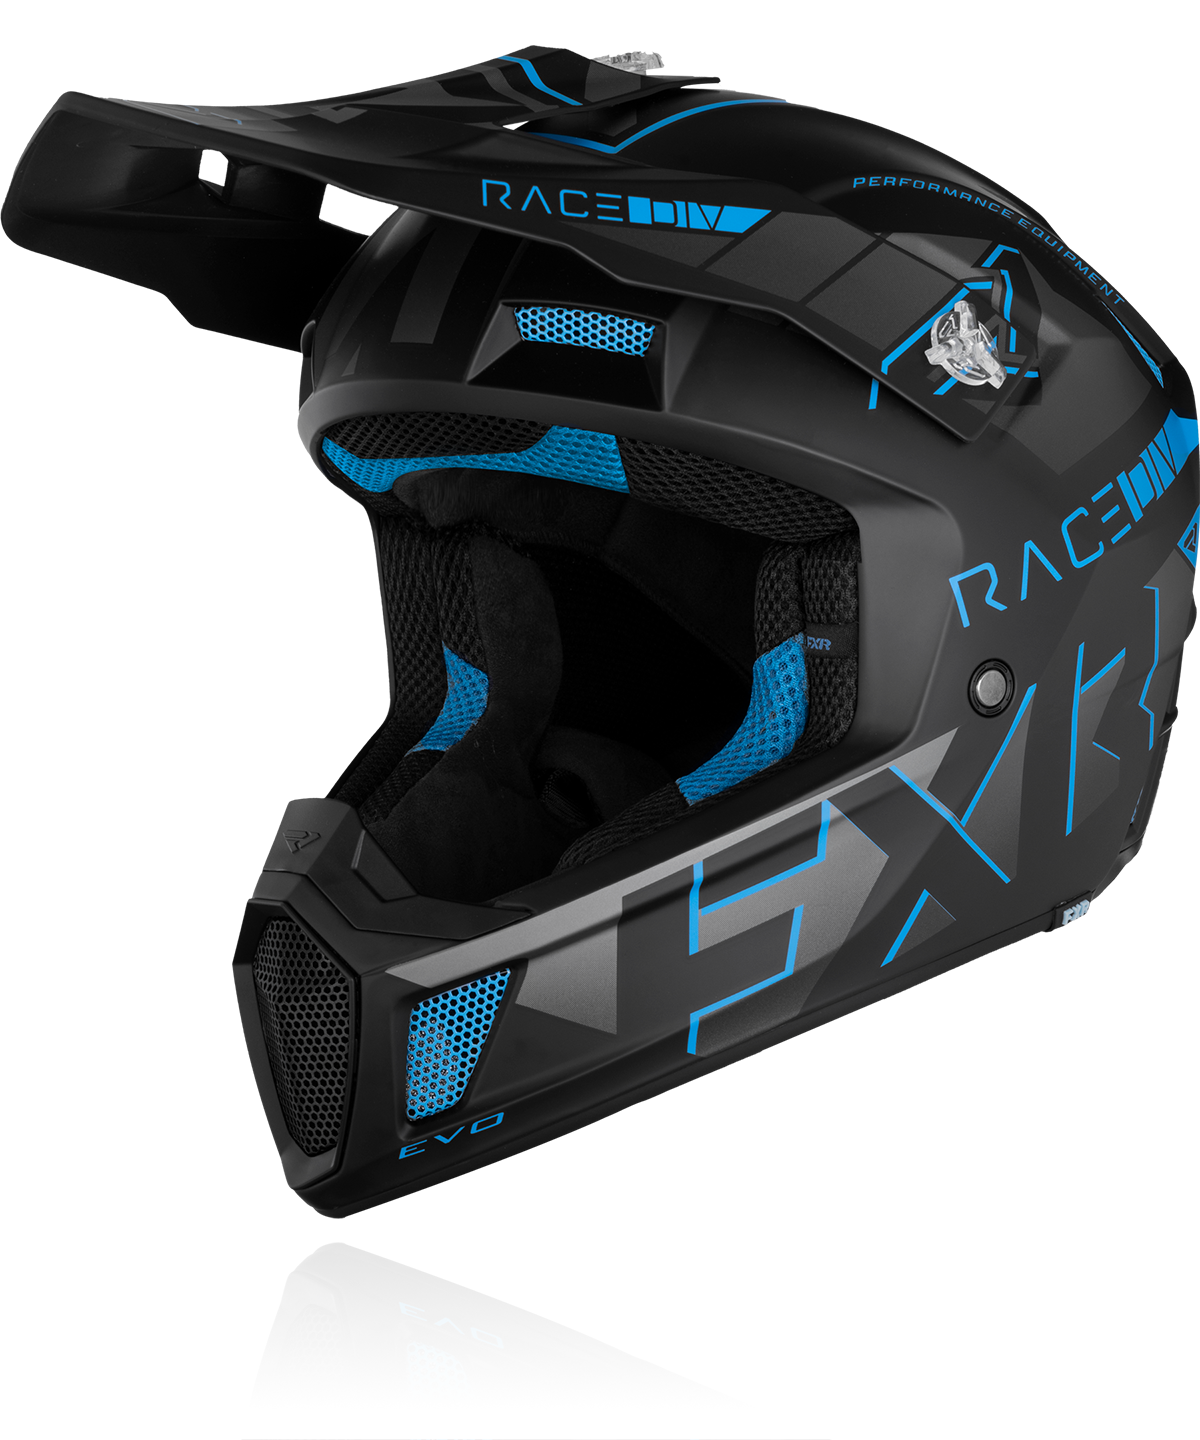 A front view image of FXR's Clutch Evo helmet